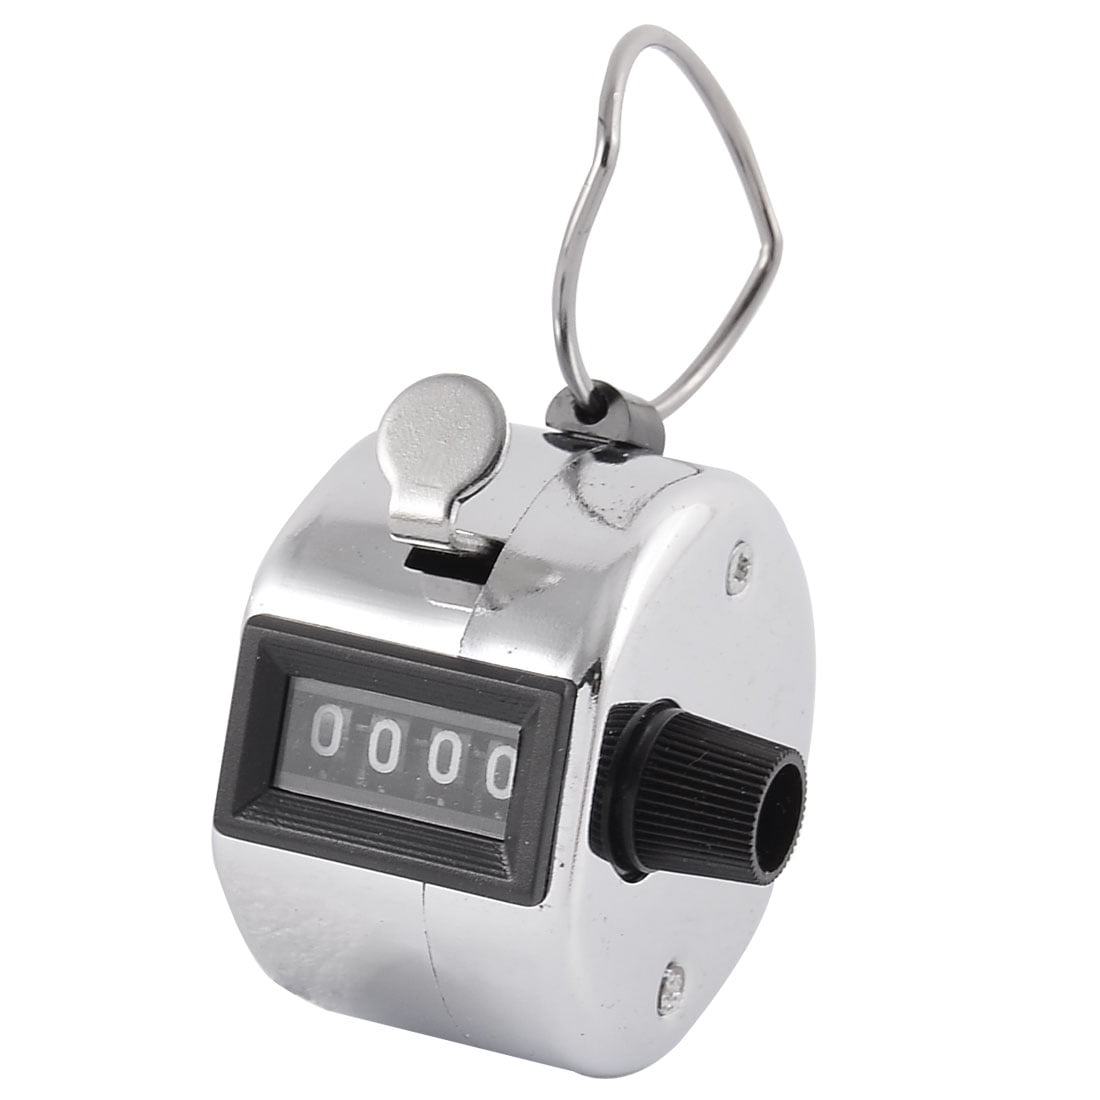 Digital Hand Tally Counter 4 Digit Number Manual Counting Golf Clicker  Outdoor Sport Soccer Key Ring